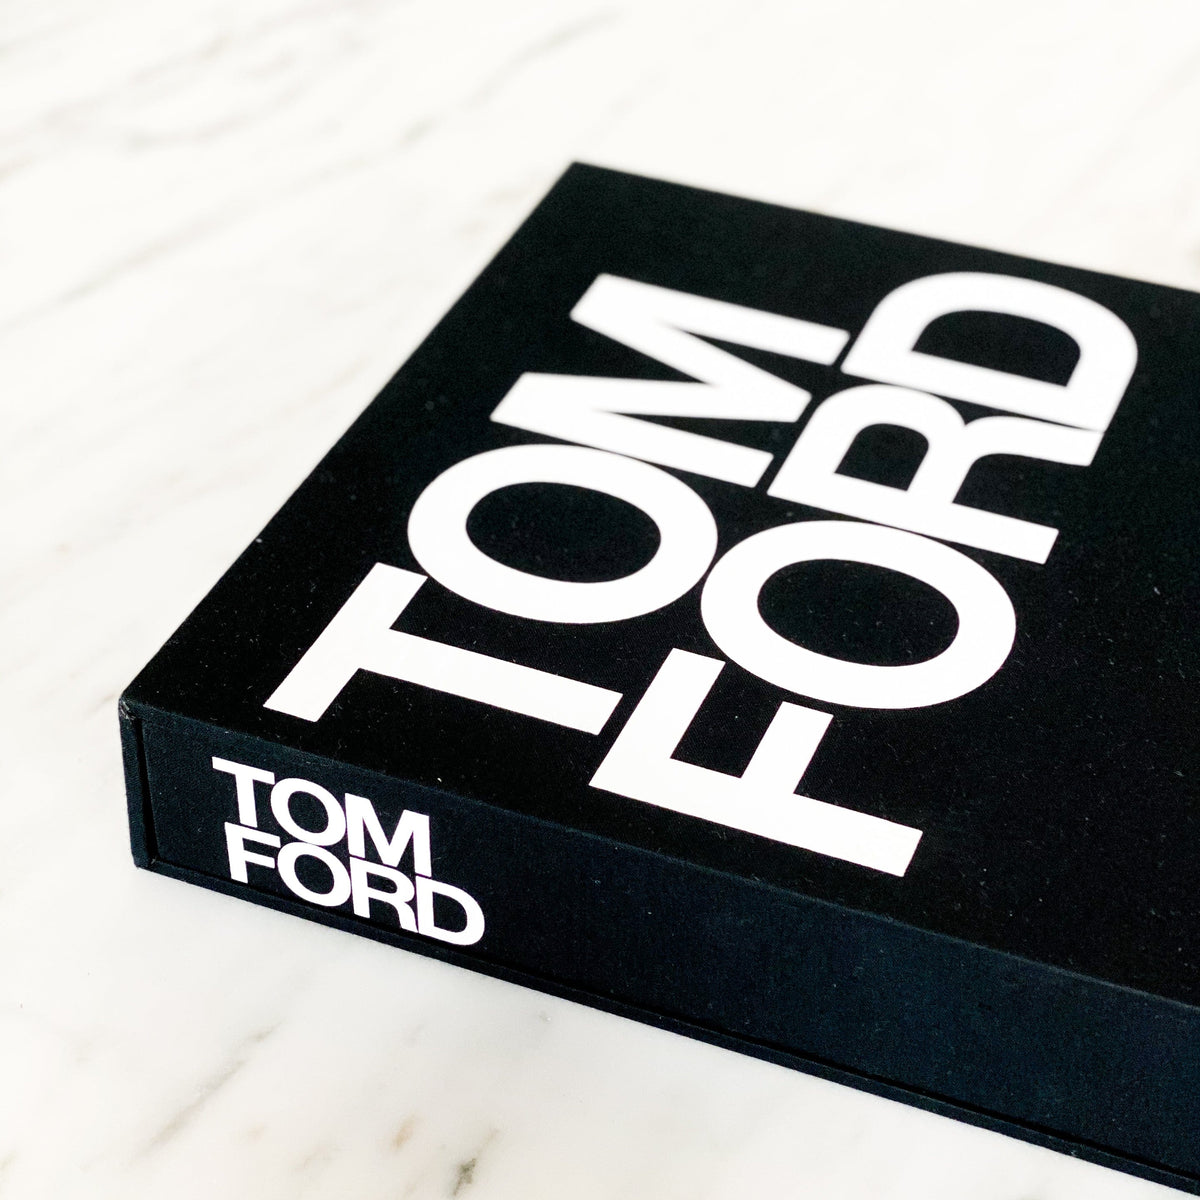 Tom Ford – Shop at Maison